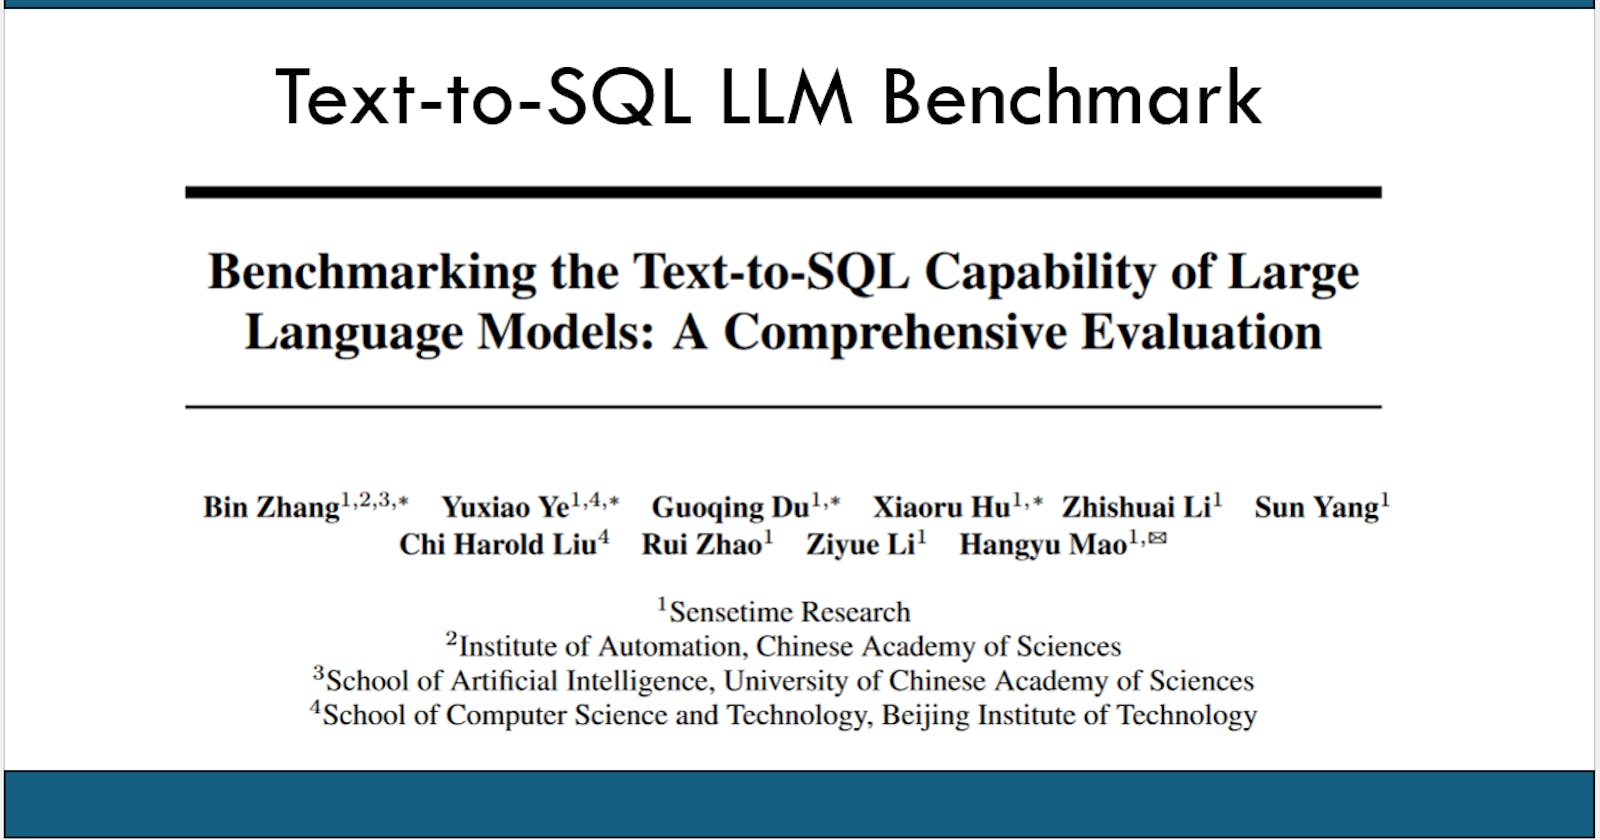 Benchmarking the Text-to-SQL Capability of Large
Language Models: A Comprehensive Evaluation (Short Summary)